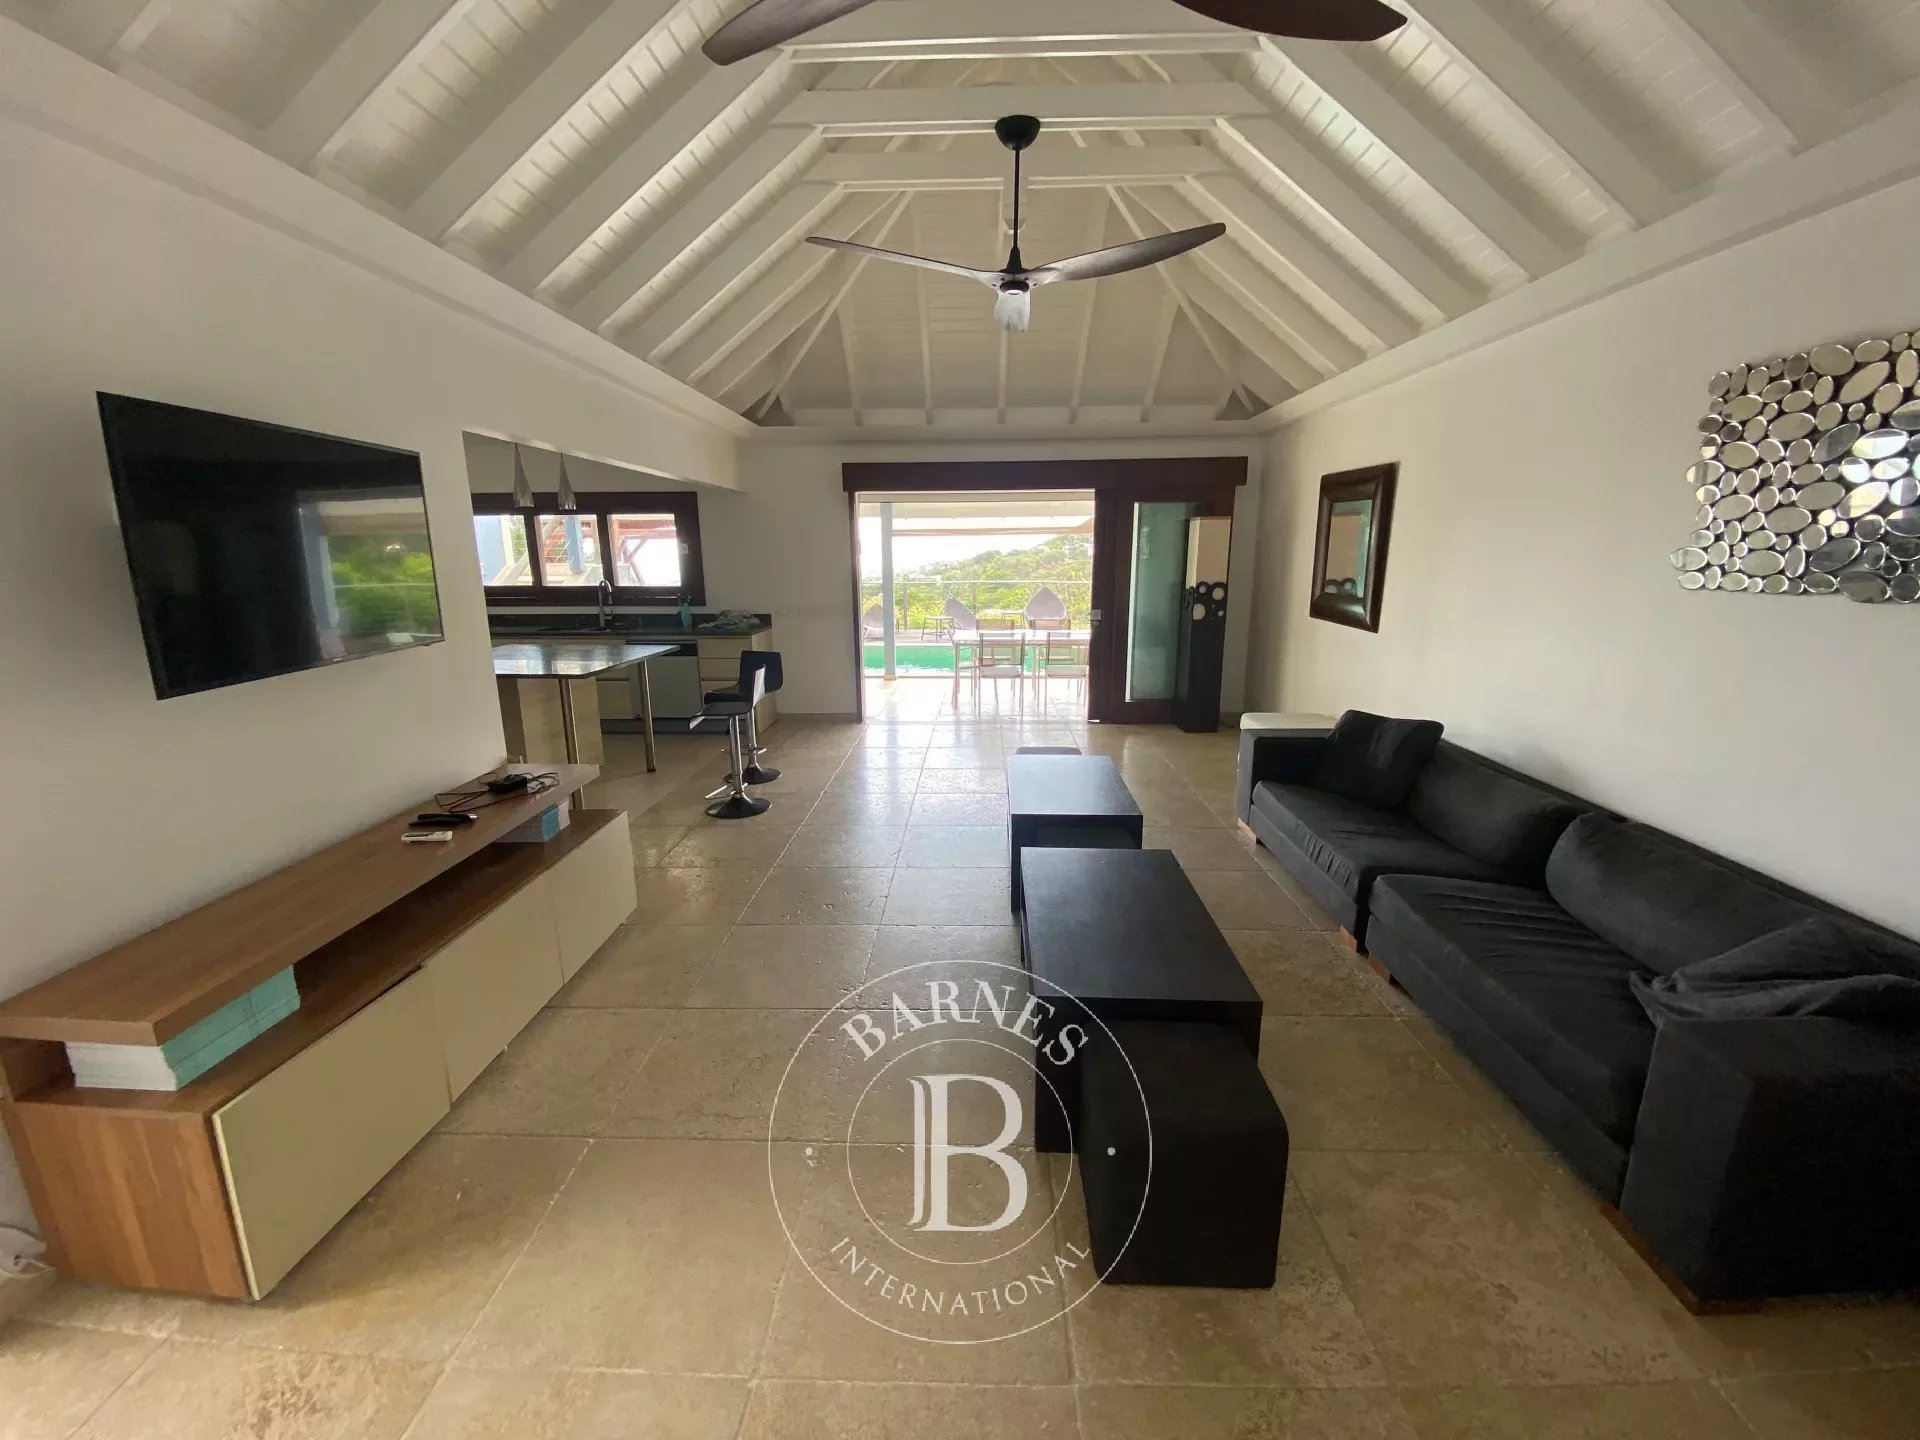 6-bedroom property in St.Barths - picture 4 title=